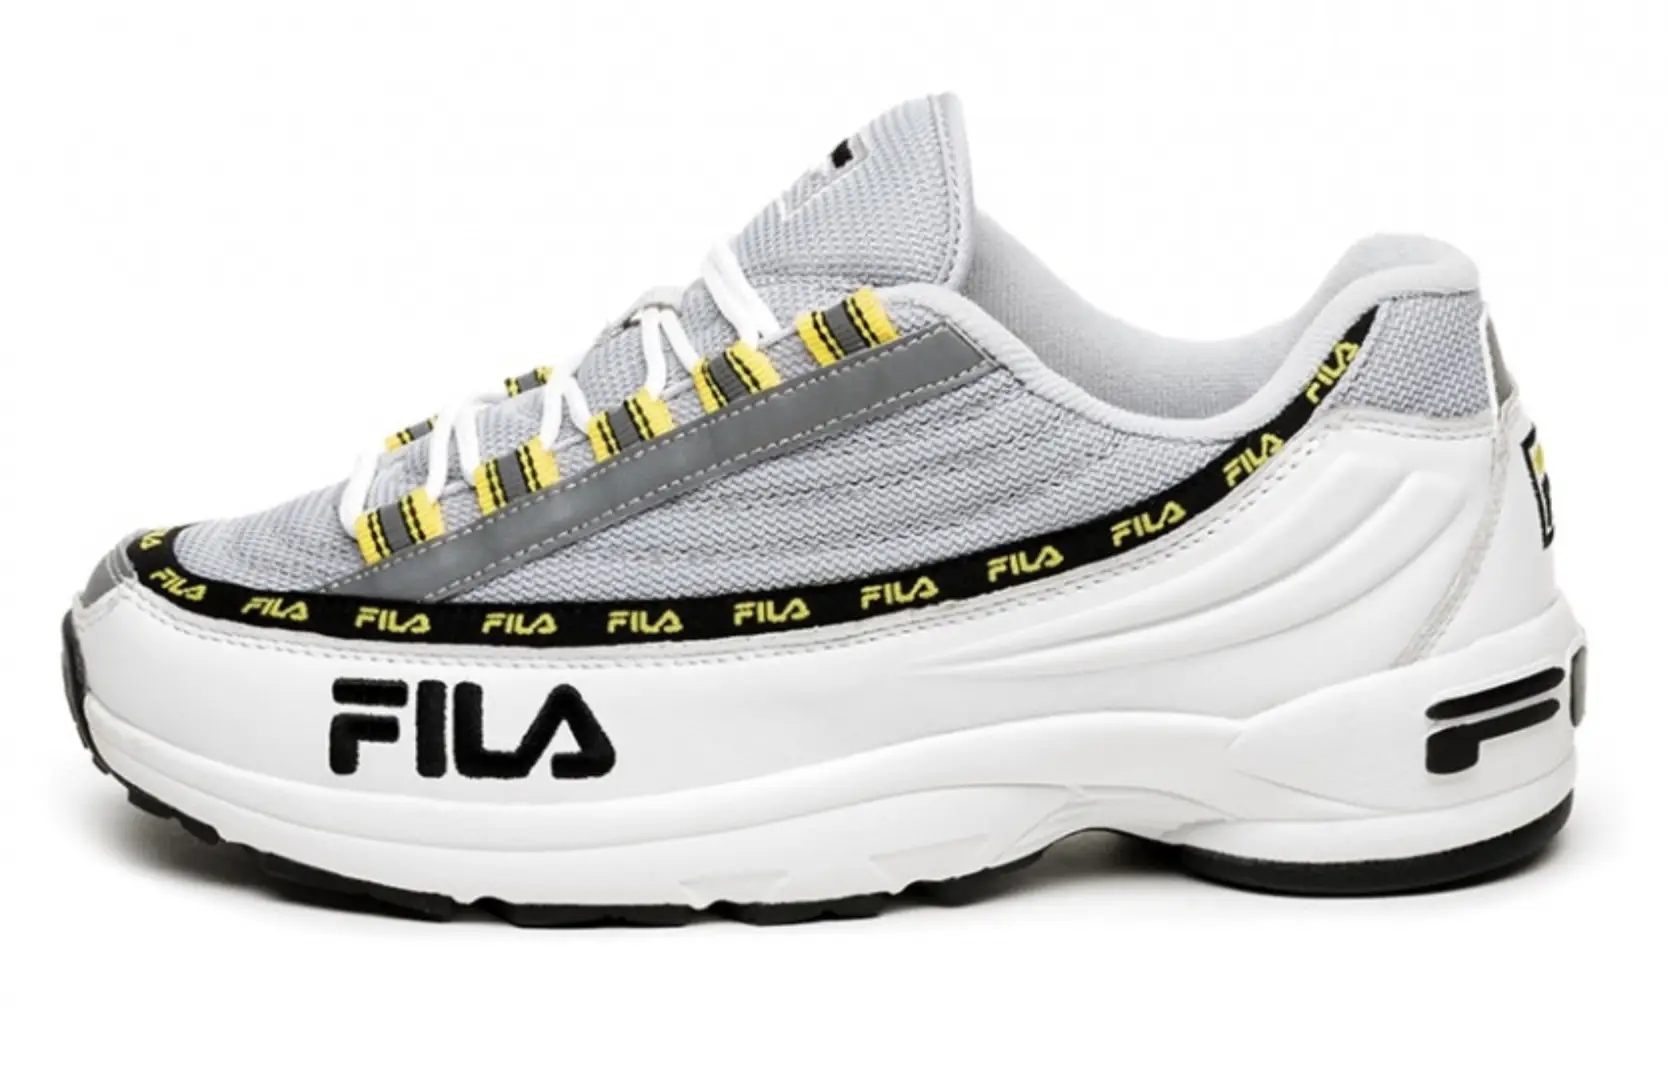 Two New Fila DSTR 97 Colourways Are Available Now | The Sole Supplier